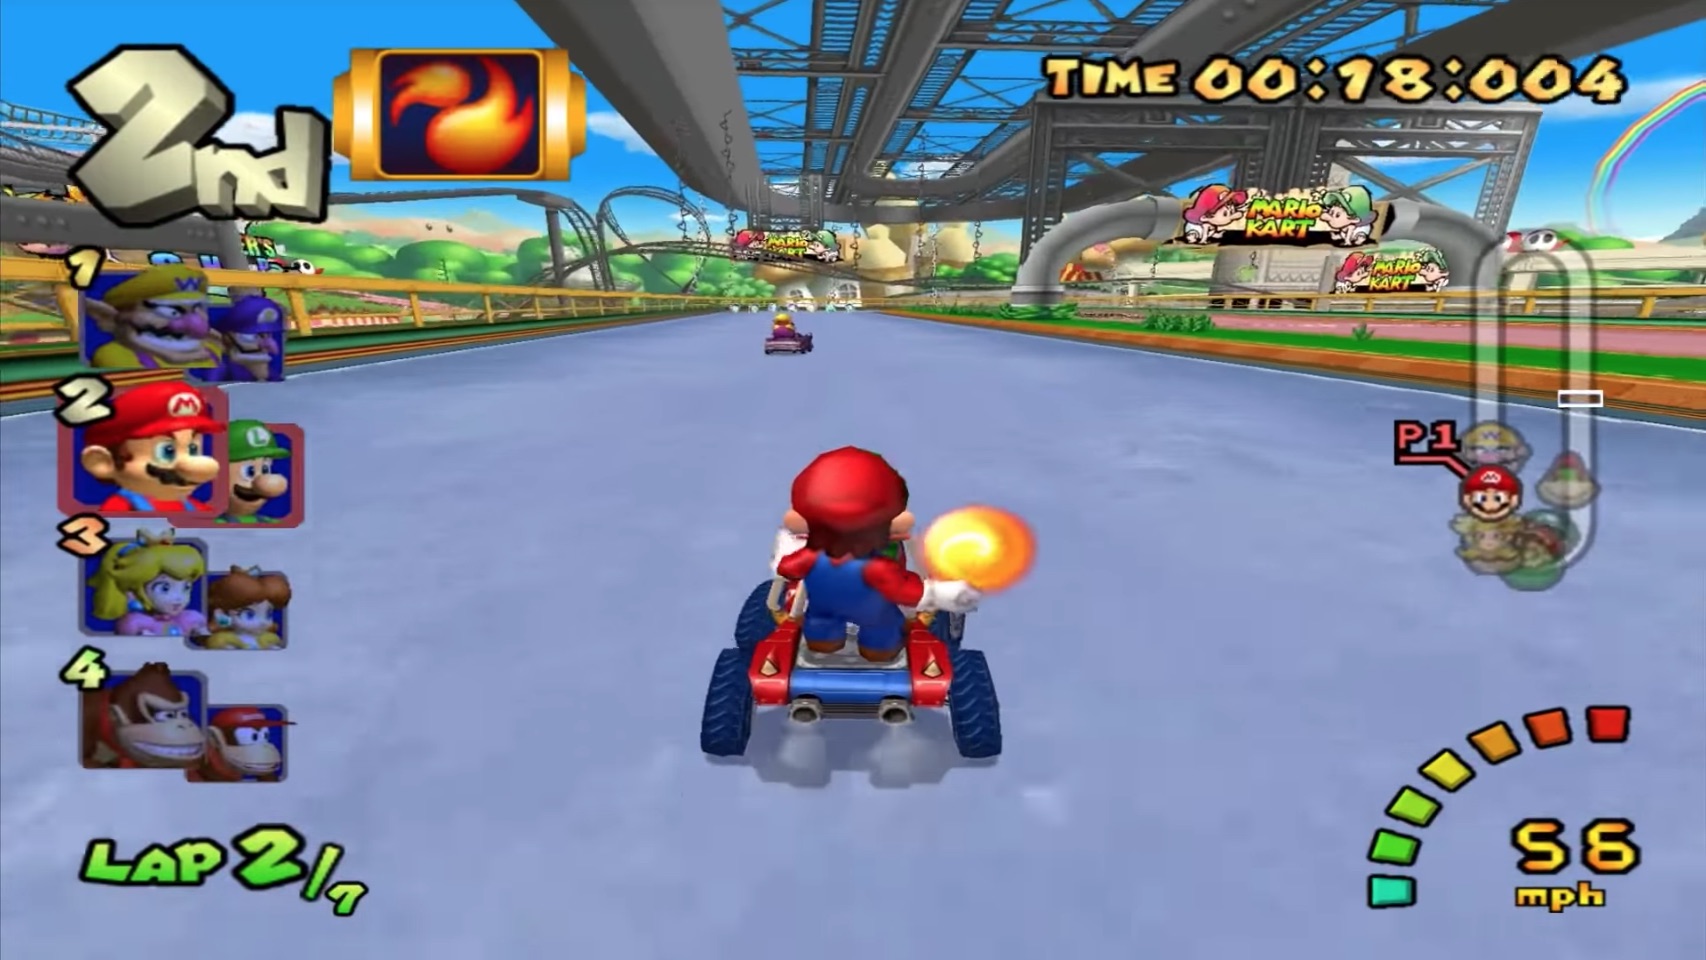 30 Years of Mario Kart Game Design History - 82 Images - Ver